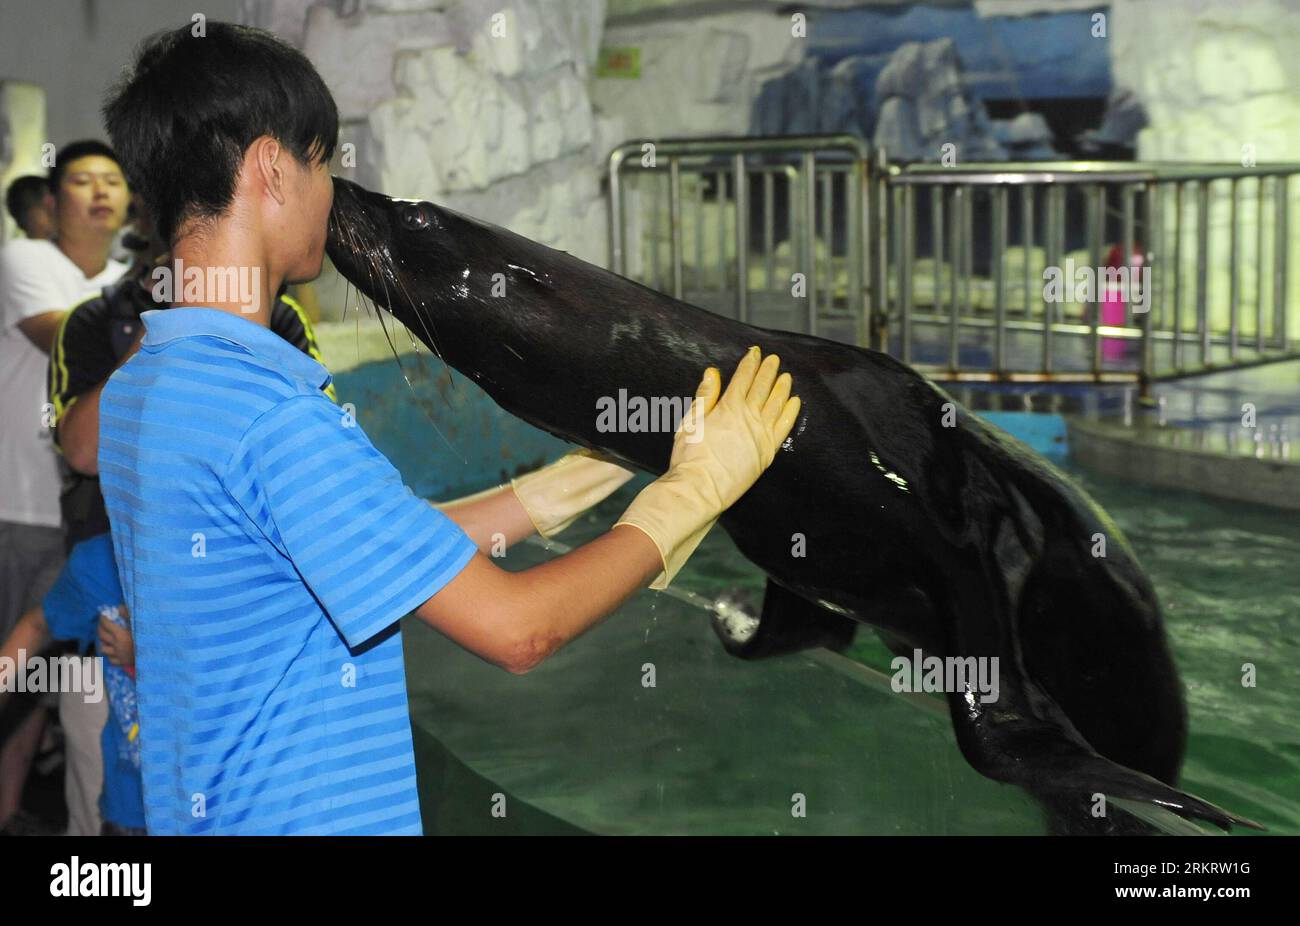 Bildnummer: 58311634  Datum: 05.08.2012  Copyright: imago/Xinhua (120805) -- WUHAN, Aug. 5, 2012 (Xinhua) -- Sea lion Feifei plays with its feeder in the Donghu ocean park of Wuhan, capital of central China s Hubei Province, Aug. 5, 2012. Doctors and experts decided to give a non-surgical treatments, including purifying water quality, increasing water salinity and dripping eye drops, to the 11-year-old Feifei with cataract. (Xinhua/Hao Tongqian)(mcg) CHINA-WUHAN-SEA LION-CATARACT (CN) PUBLICATIONxNOTxINxCHN Gesellschaft Tier Seelöwe Tierarzt grauer Star Katarakt xbs x0x 2012 quer      58311634 Stock Photo